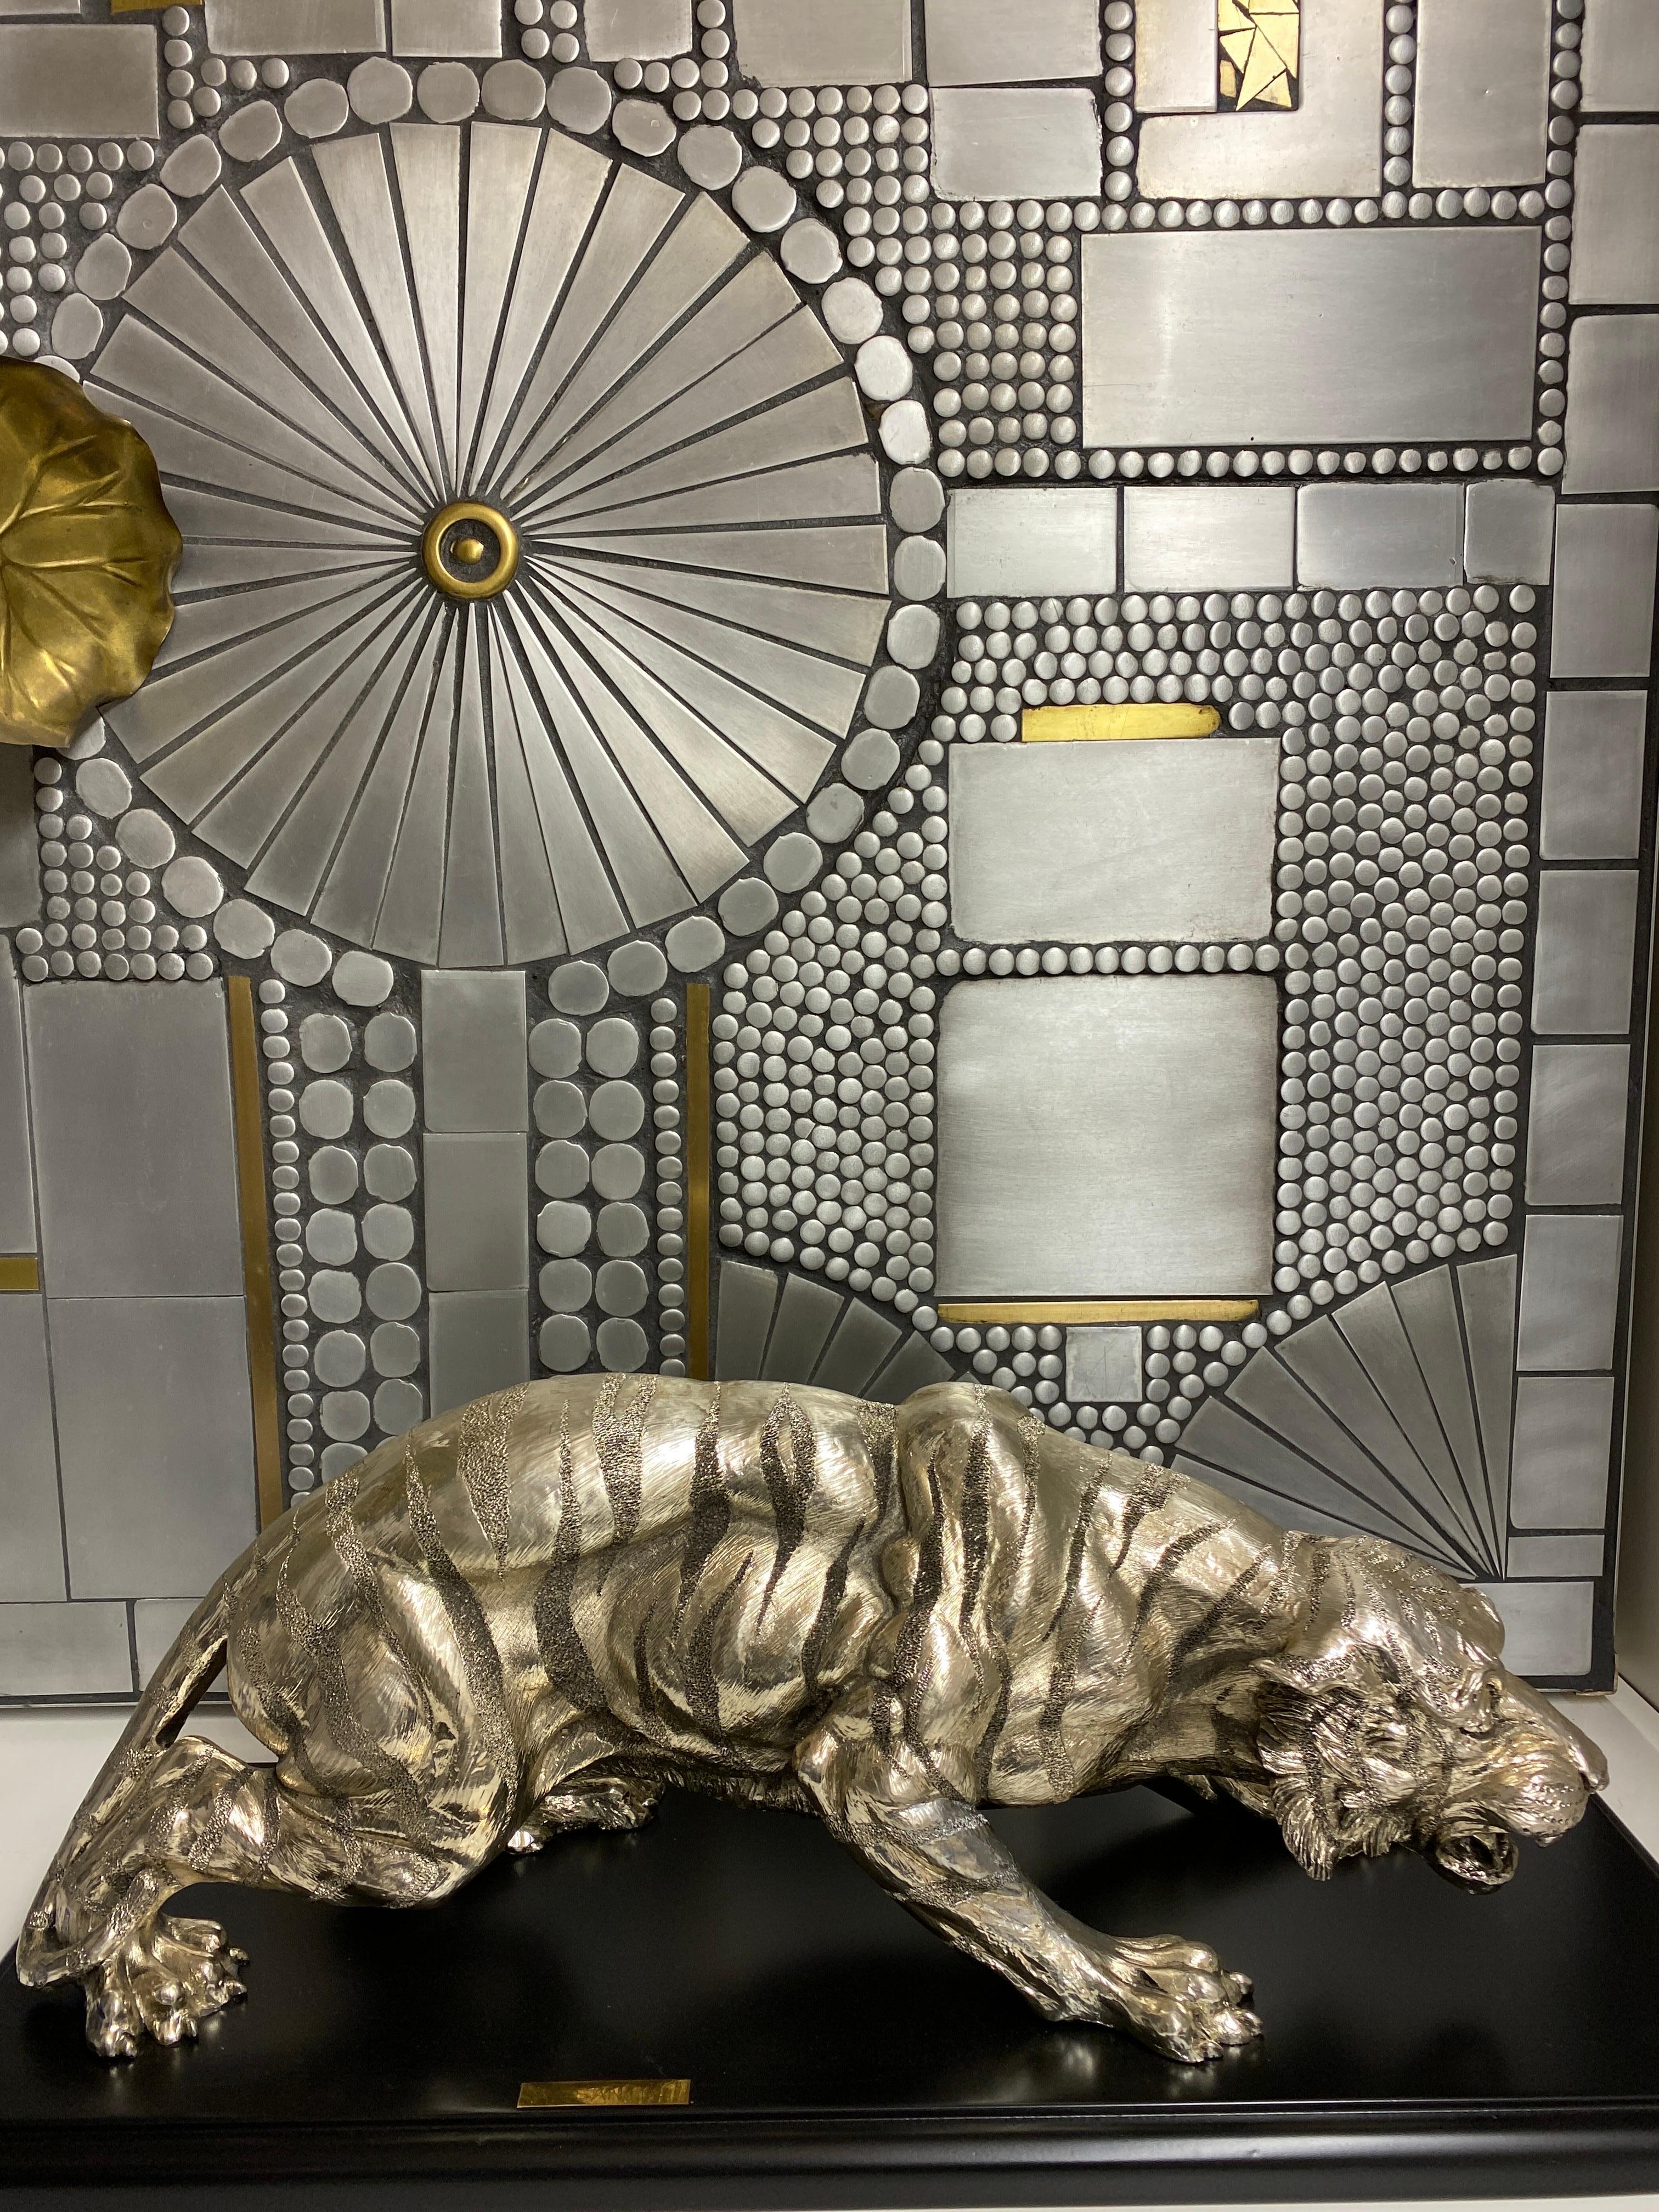 Bengal Tiger sculpture by Santini made of silver electroplated cast composite and mounted on wooden base.